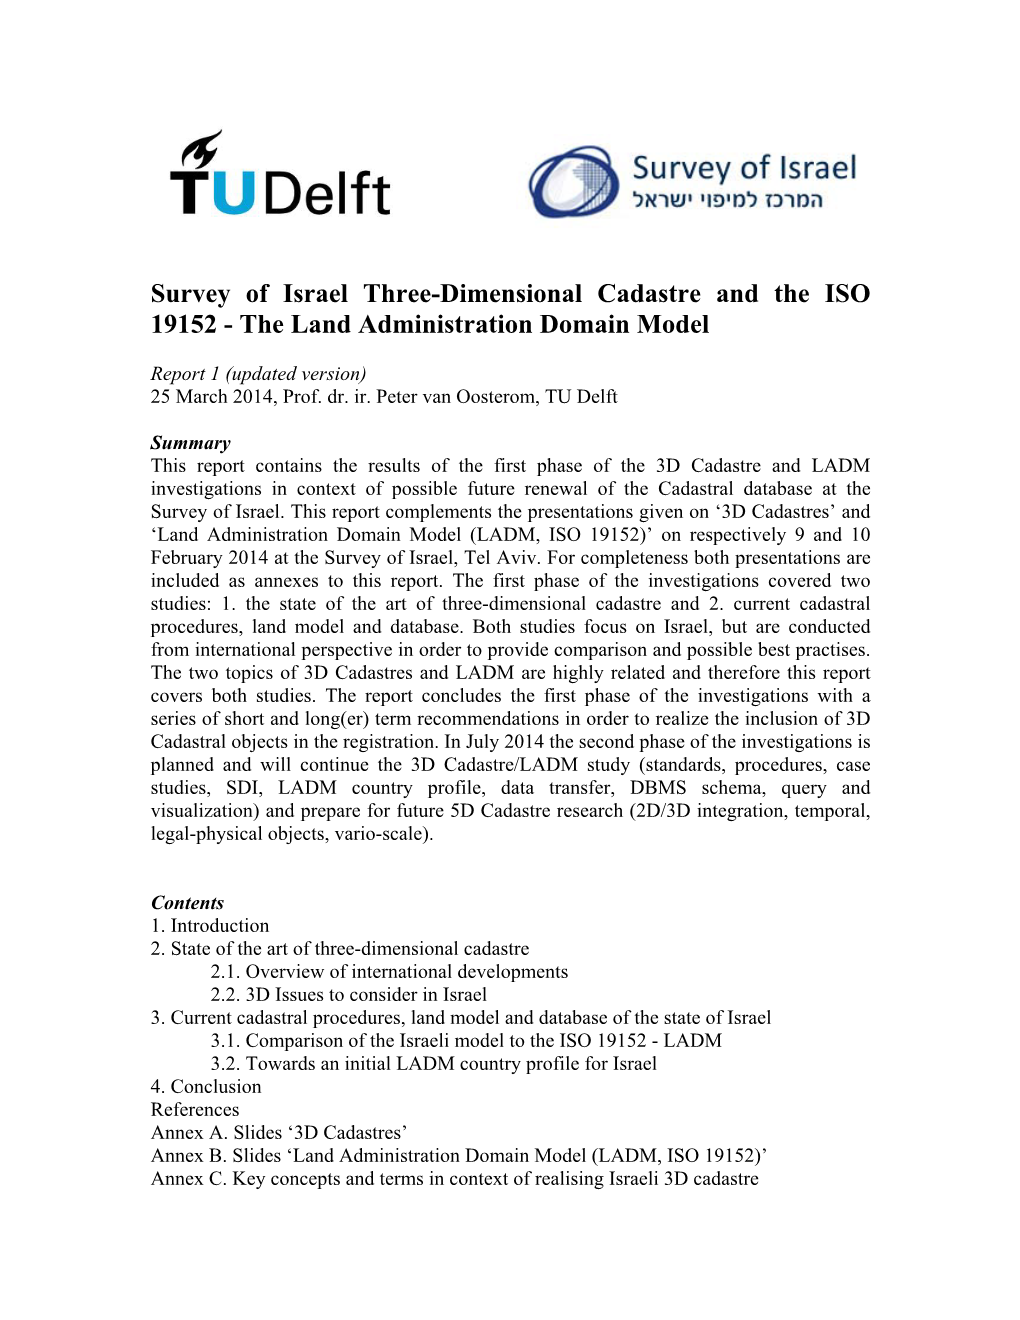 Survey of Israel Three-Dimensional Cadastre and the ISO 19152 - the Land Administration Domain Model